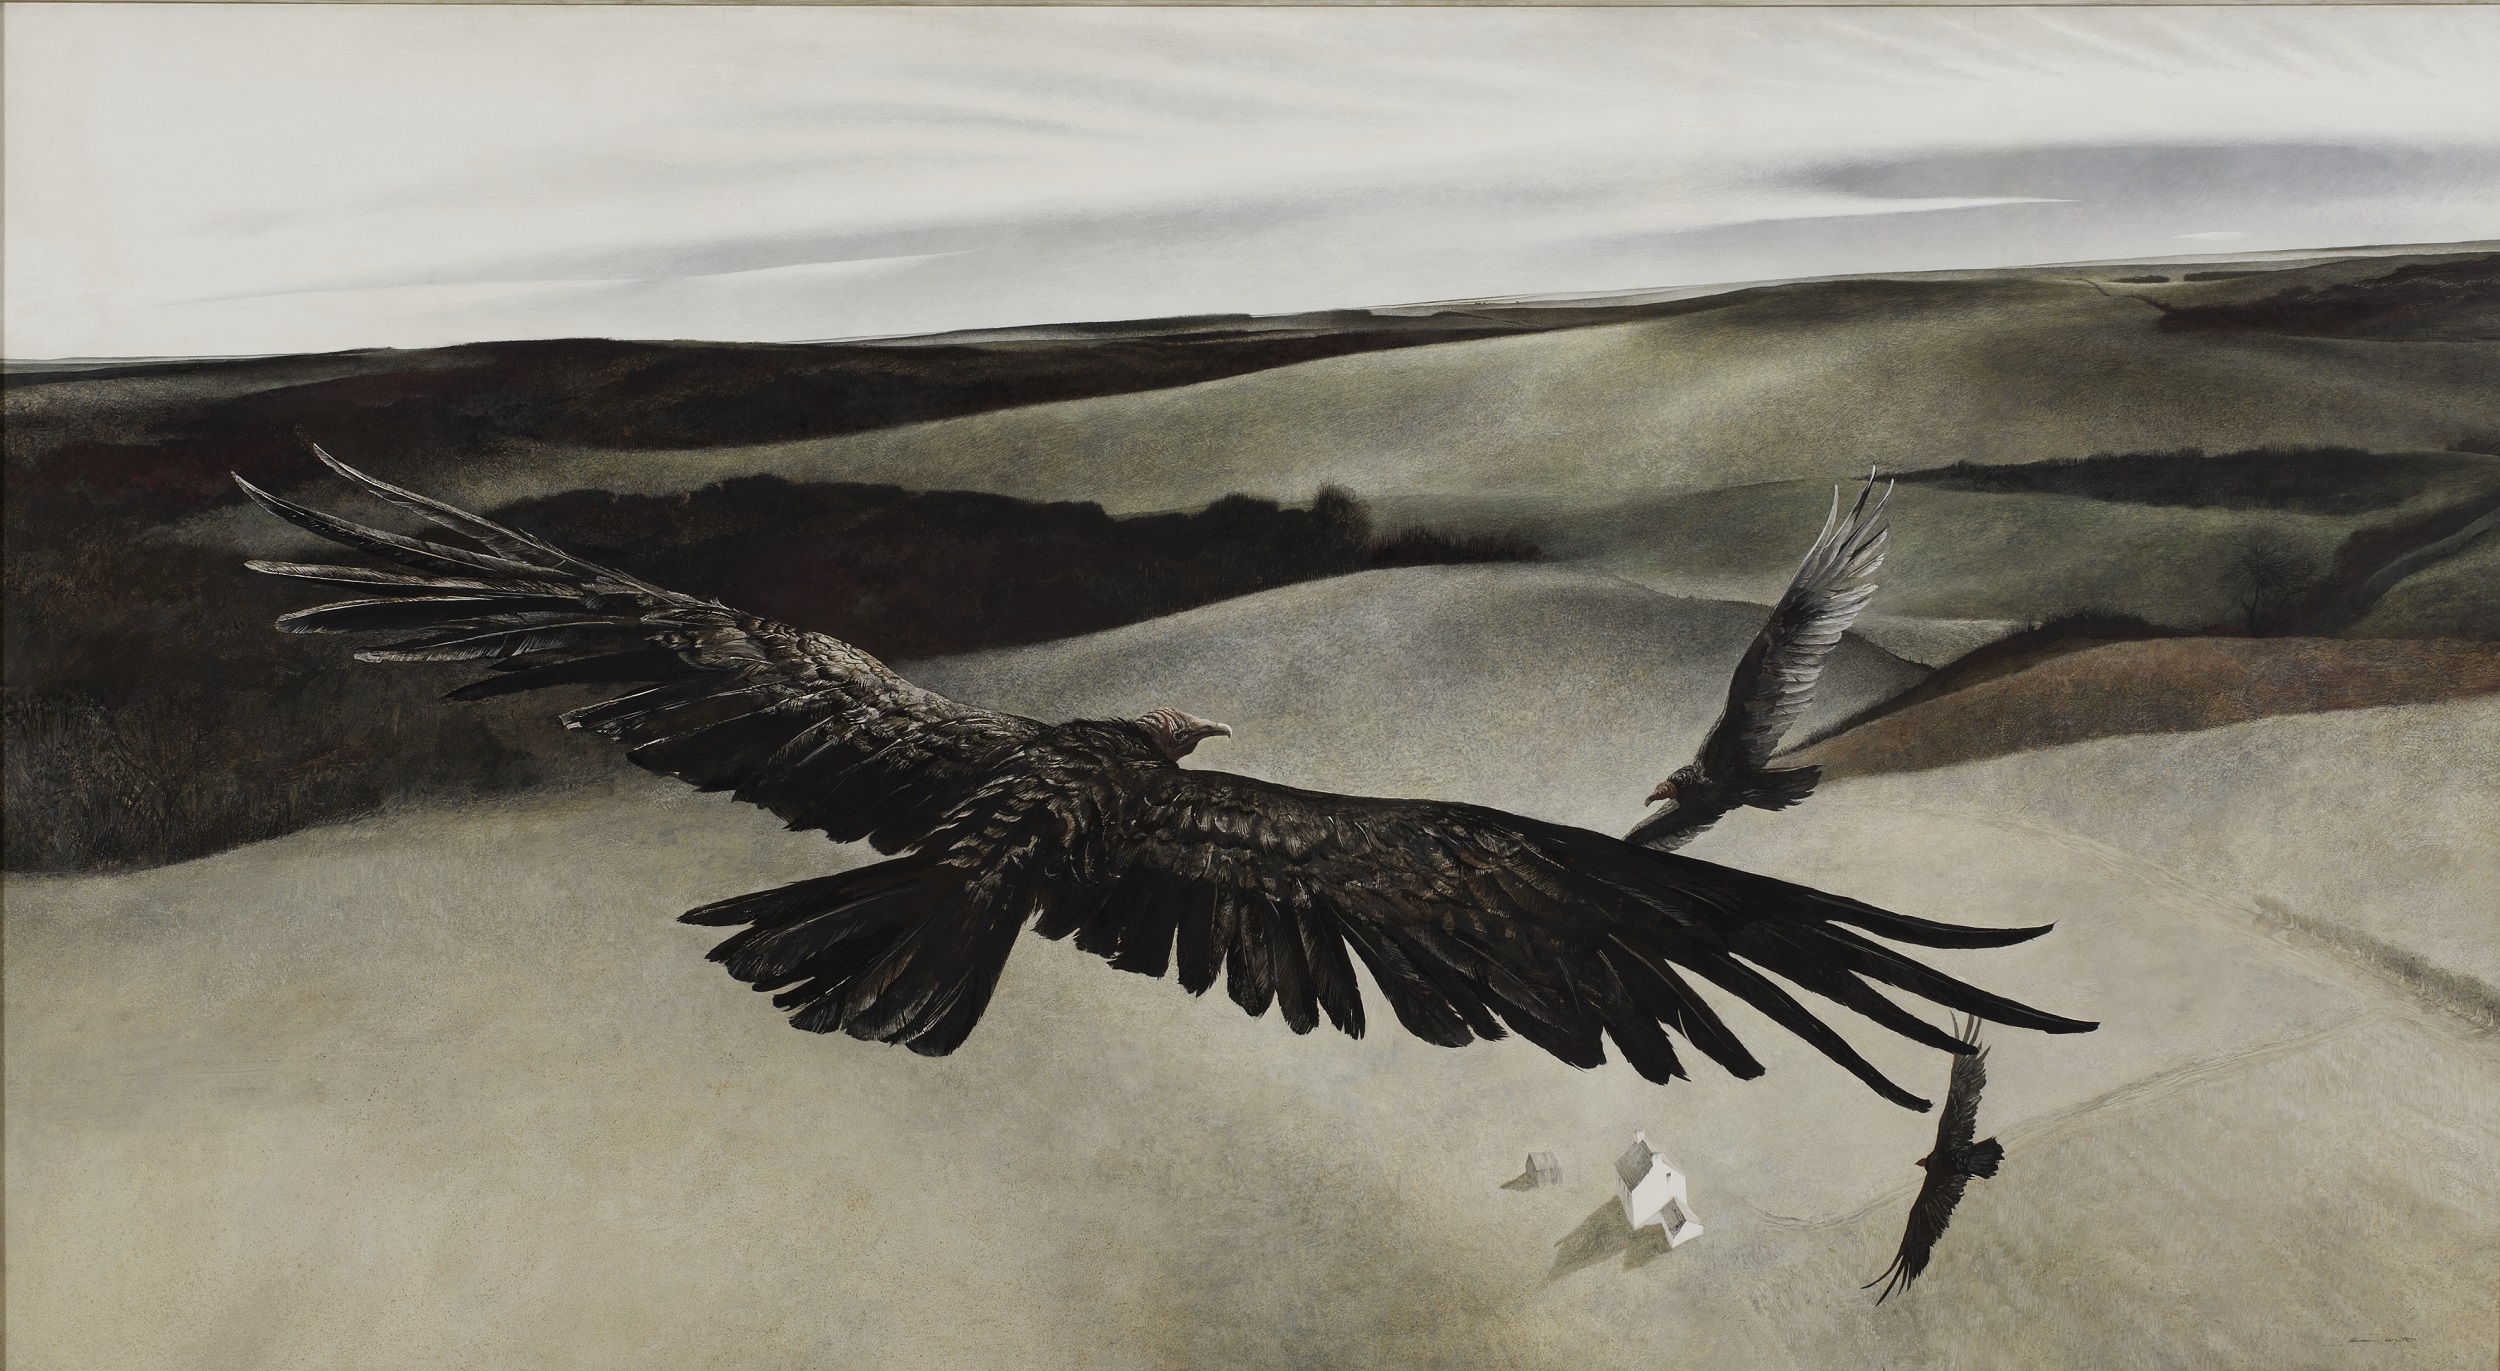 Painting of three turkey buzzards flying over a landscape, seen from above